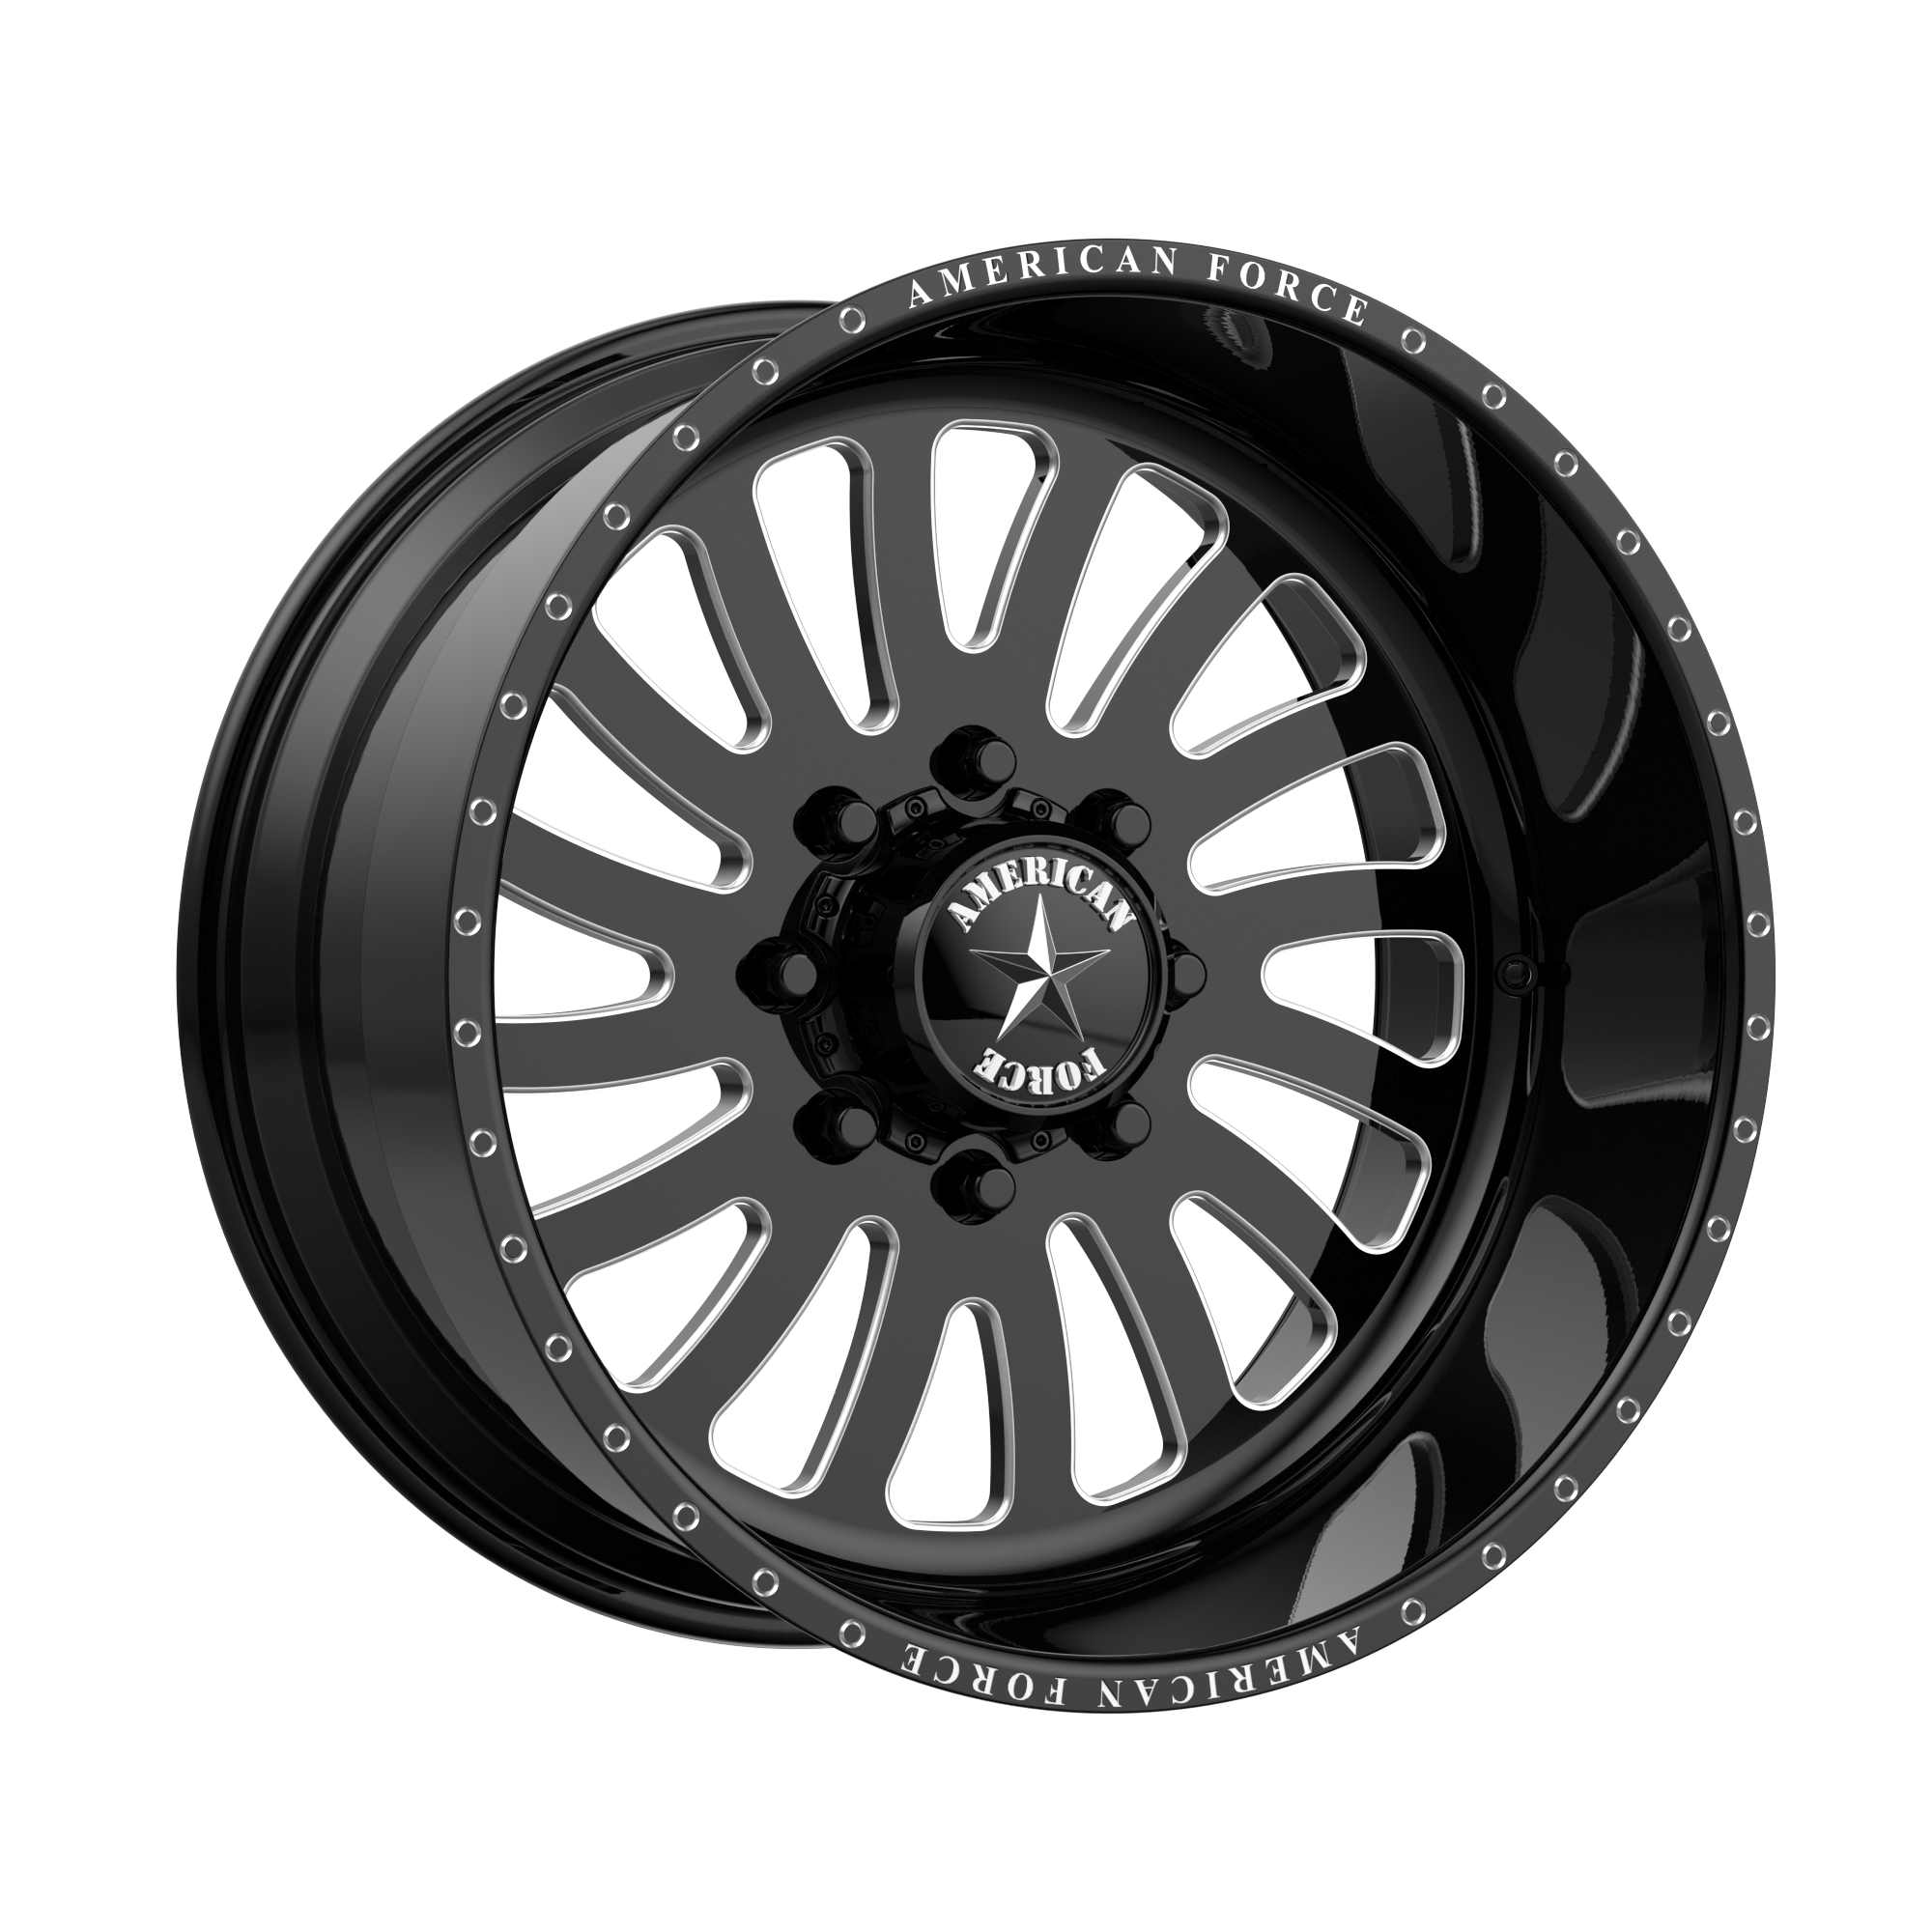 OCTANE SS 22x11 6x135.00 GLOSS BLACK MACHINED (0 mm) - Tires and Engine Performance